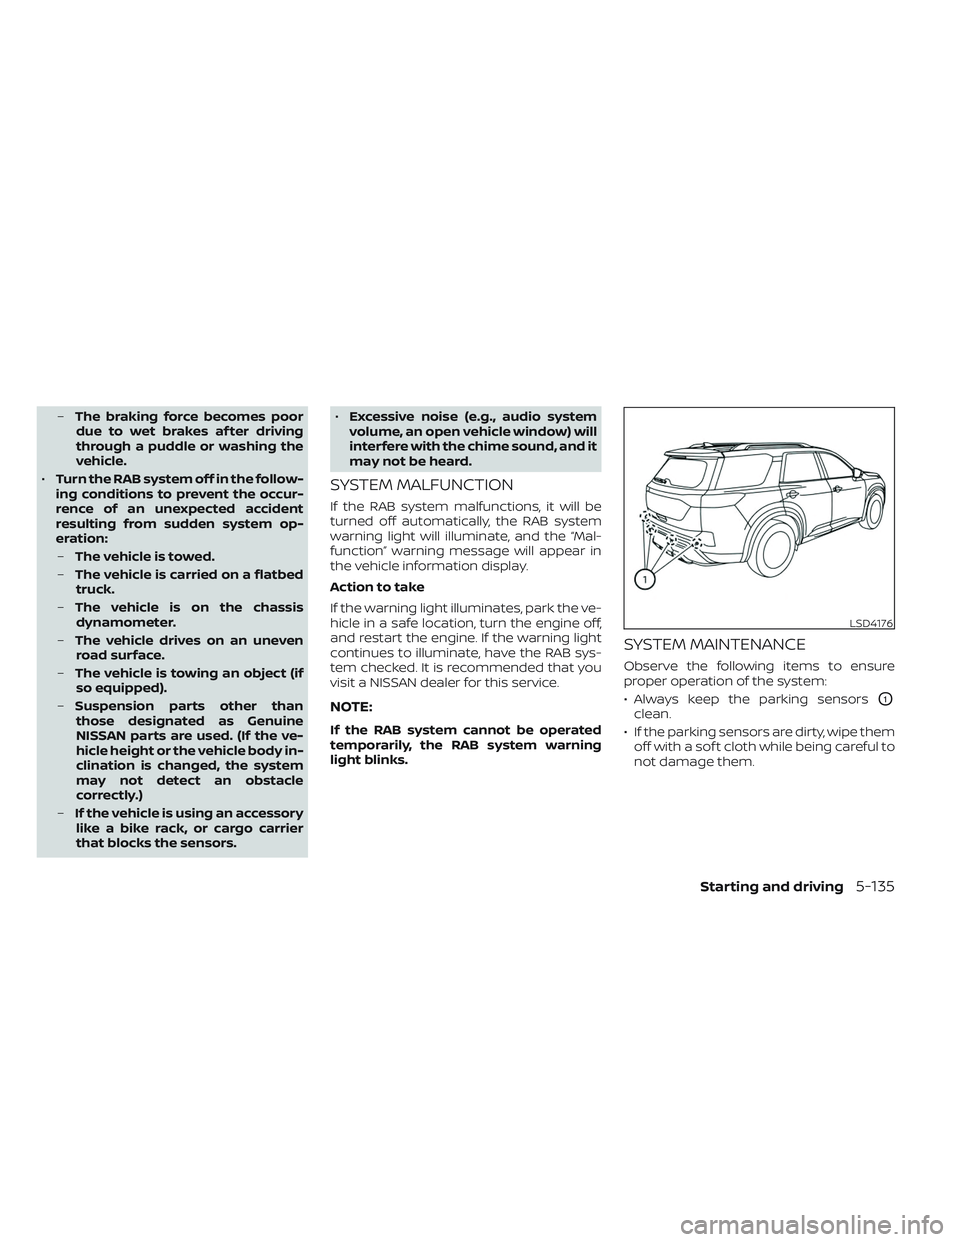 NISSAN PATHFINDER 2022  Owner´s Manual –The braking force becomes poor
due to wet brakes af ter driving
through a puddle or washing the
vehicle.
• Turn the RAB system off in the follow-
ing conditions to prevent the occur-
rence of an 